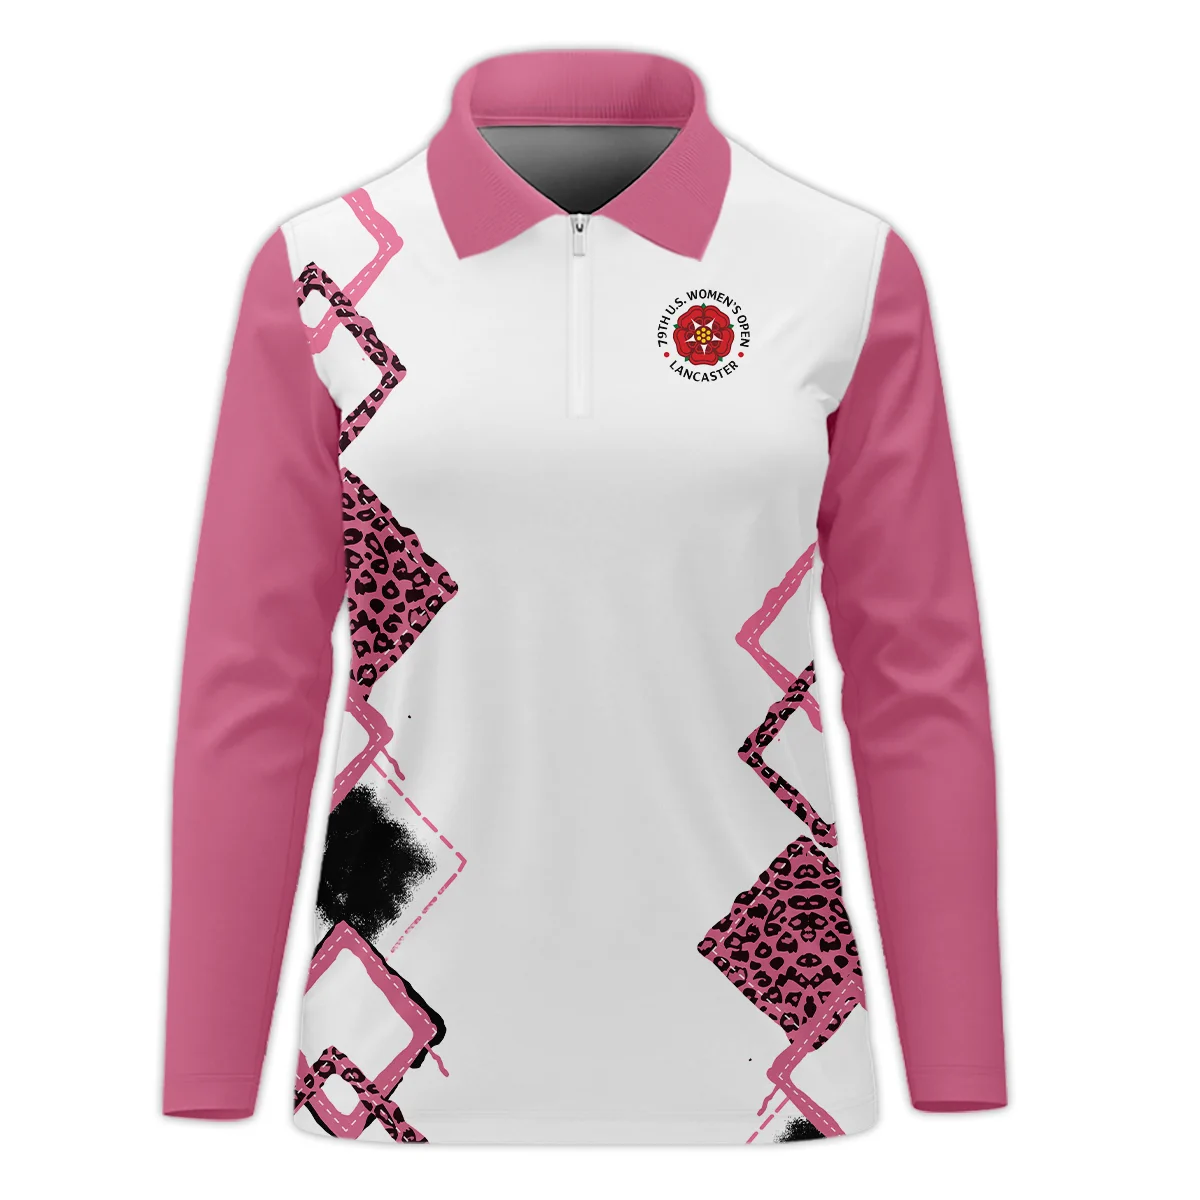 Leopard Golf Color Pink 79th U.S. Women’s Open Lancaster Sleeveless Polo Shirt Pink Color All Over Print Sleeveless Polo Shirt For Woman